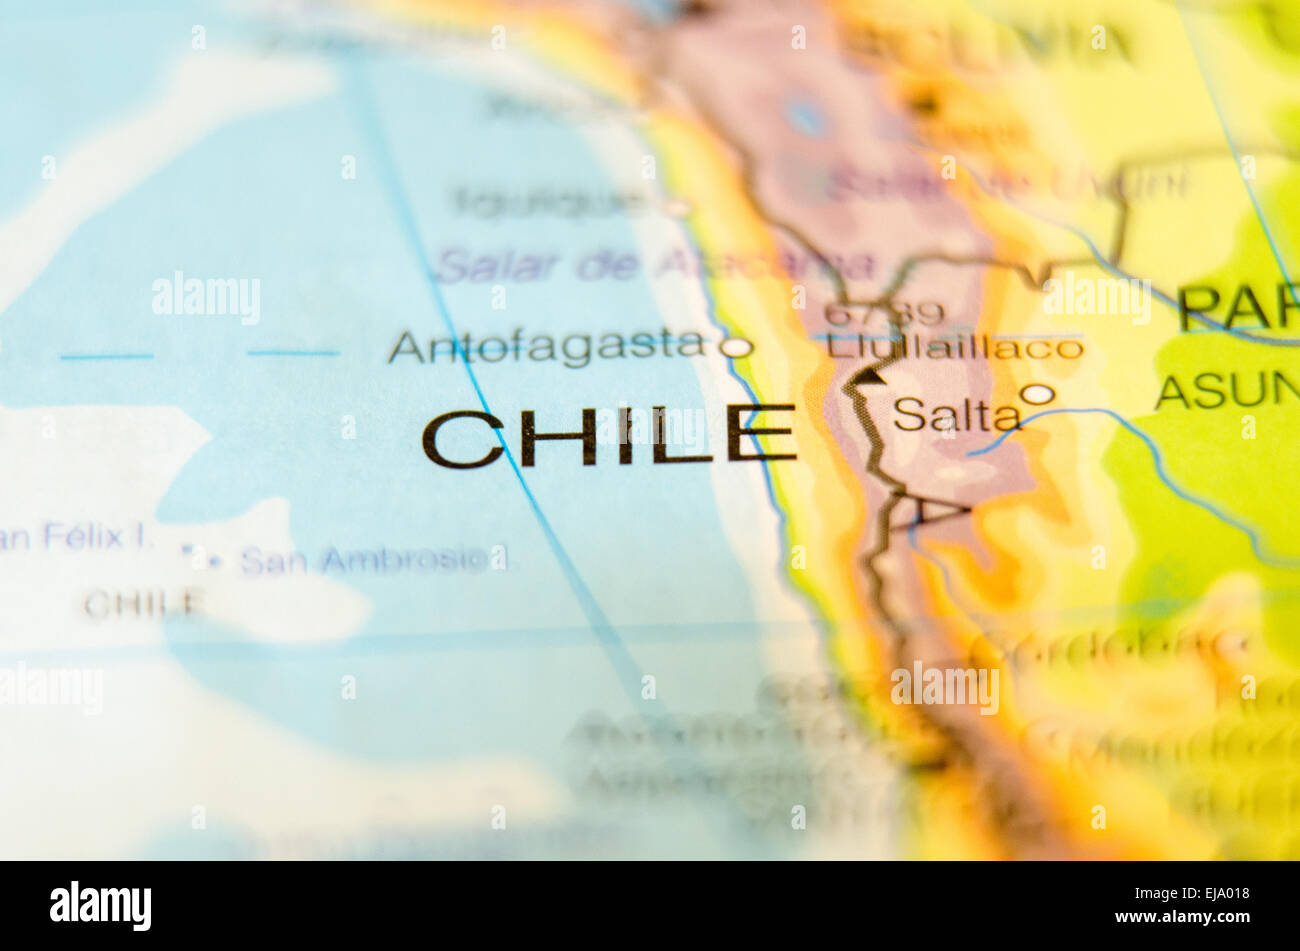 chile country on map Stock Photo